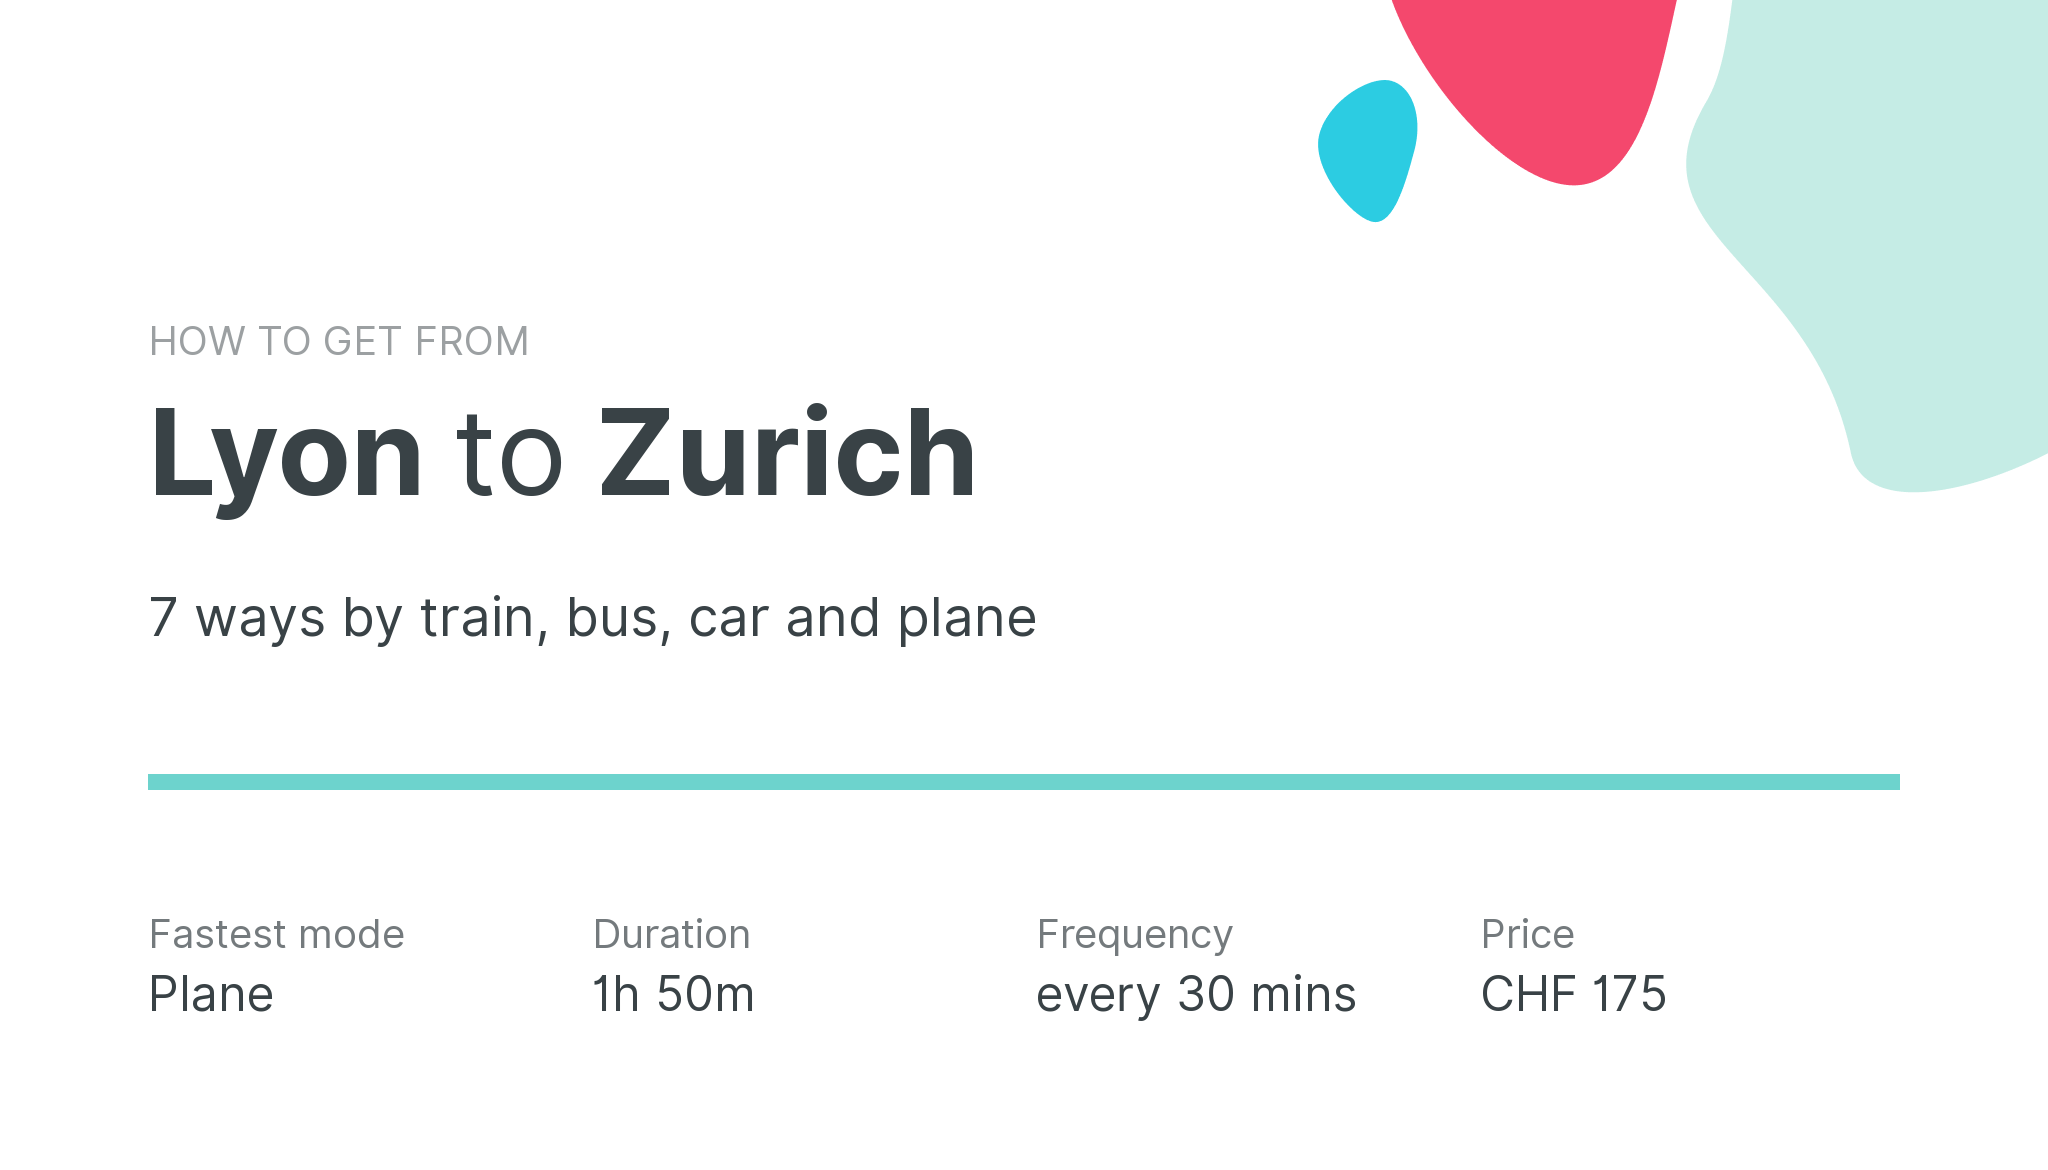 How do I get from Lyon to Zurich